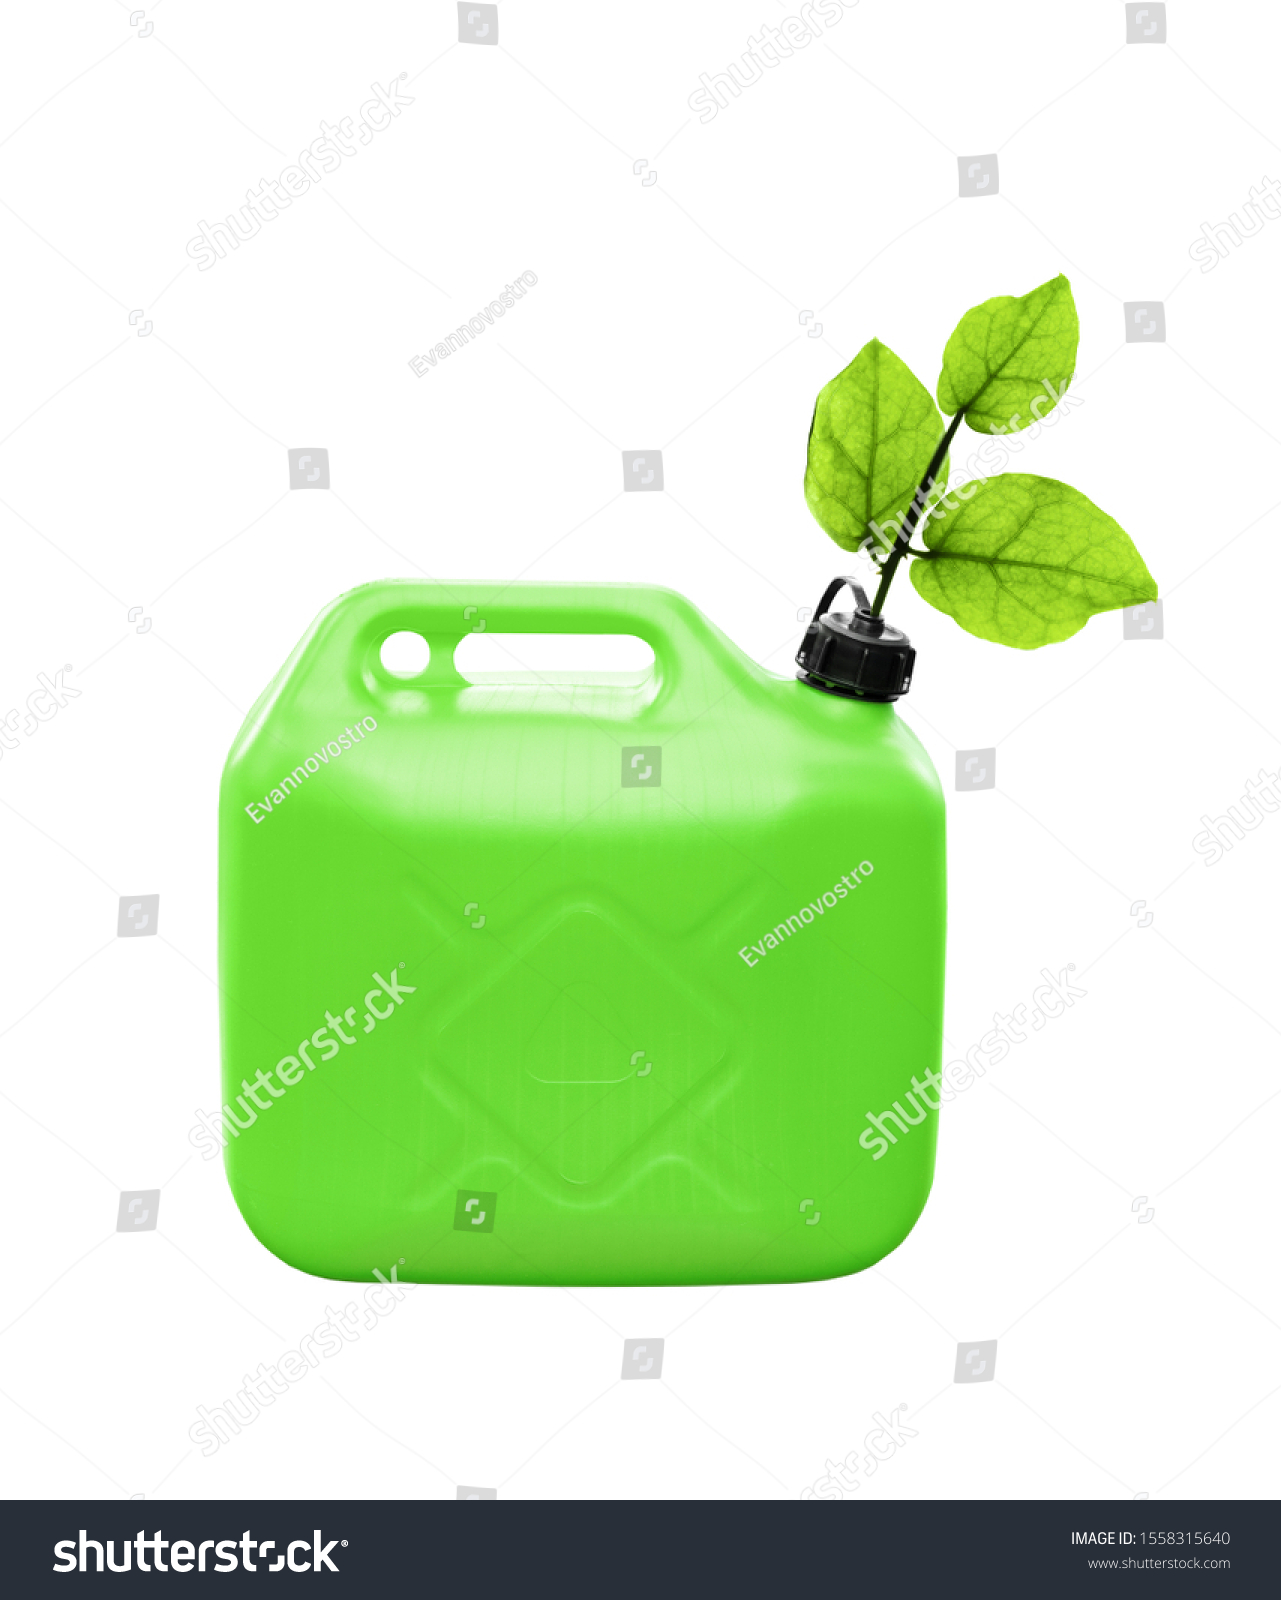 Concept of an ecological fuel. Fresh plant leaves growing from a green plastic jerrycan isolated on white background #1558315640